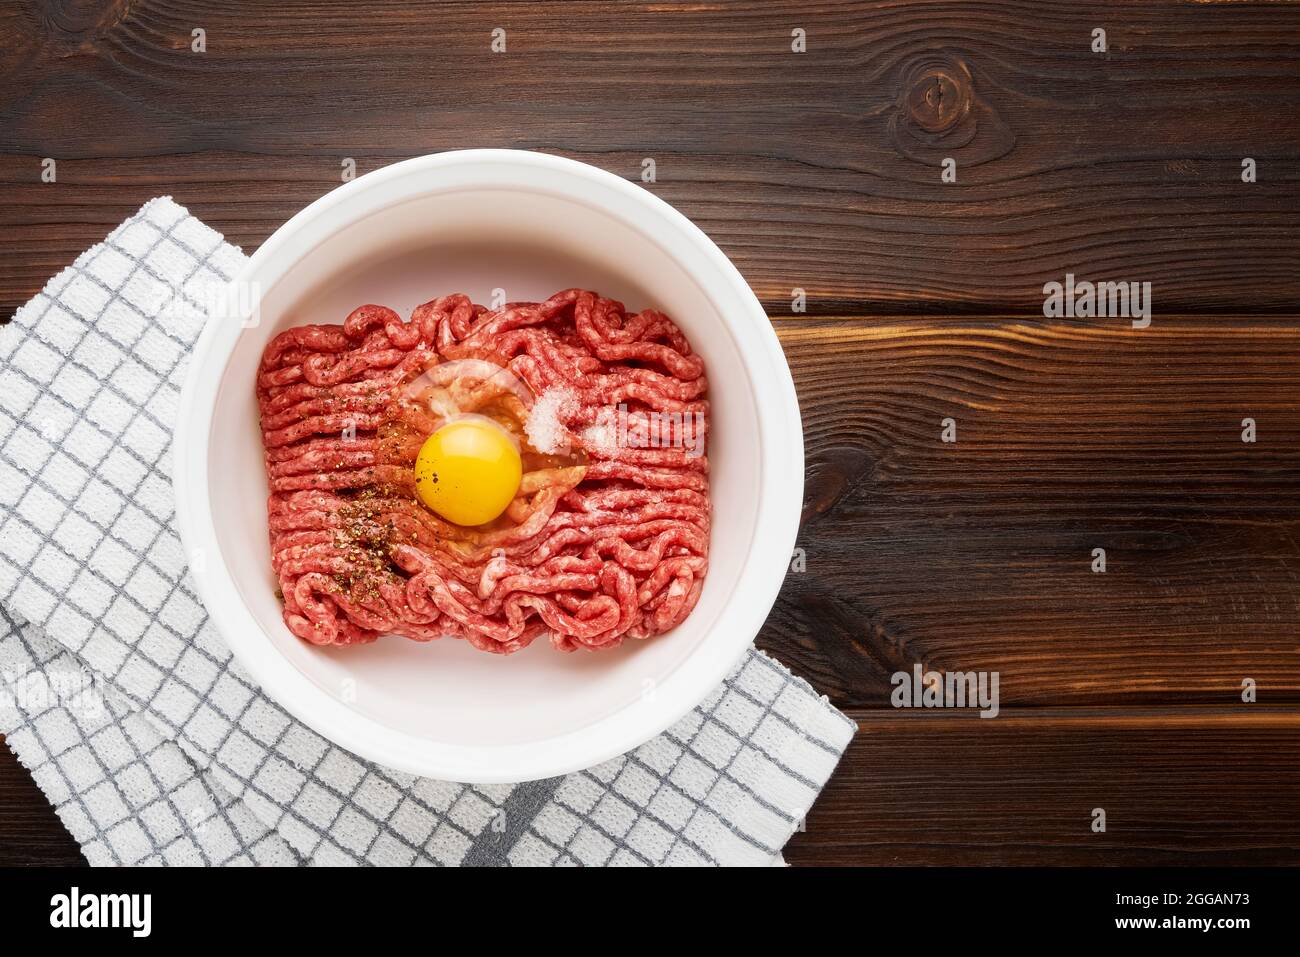 Raw ground beef or minced beef in a white bowl on wooden background. Top view, copy space for text Stock Photo